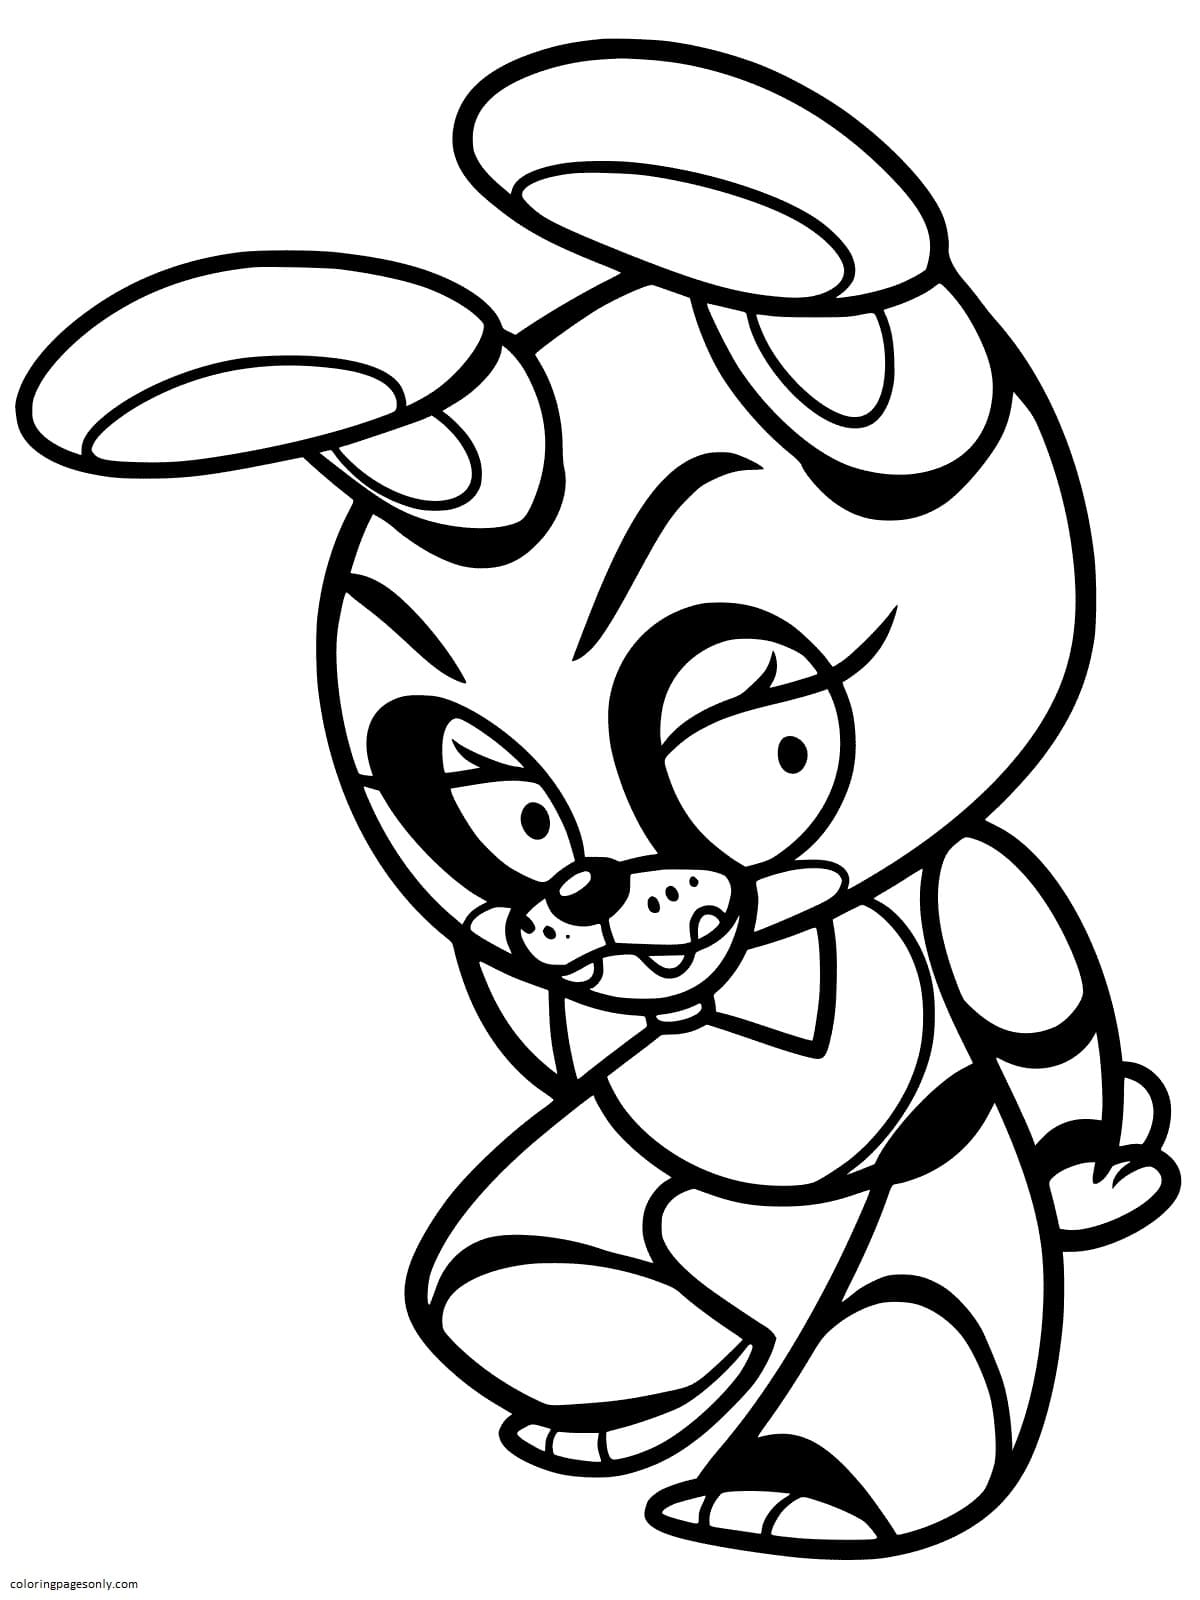 Five nights at freddys coloring pages